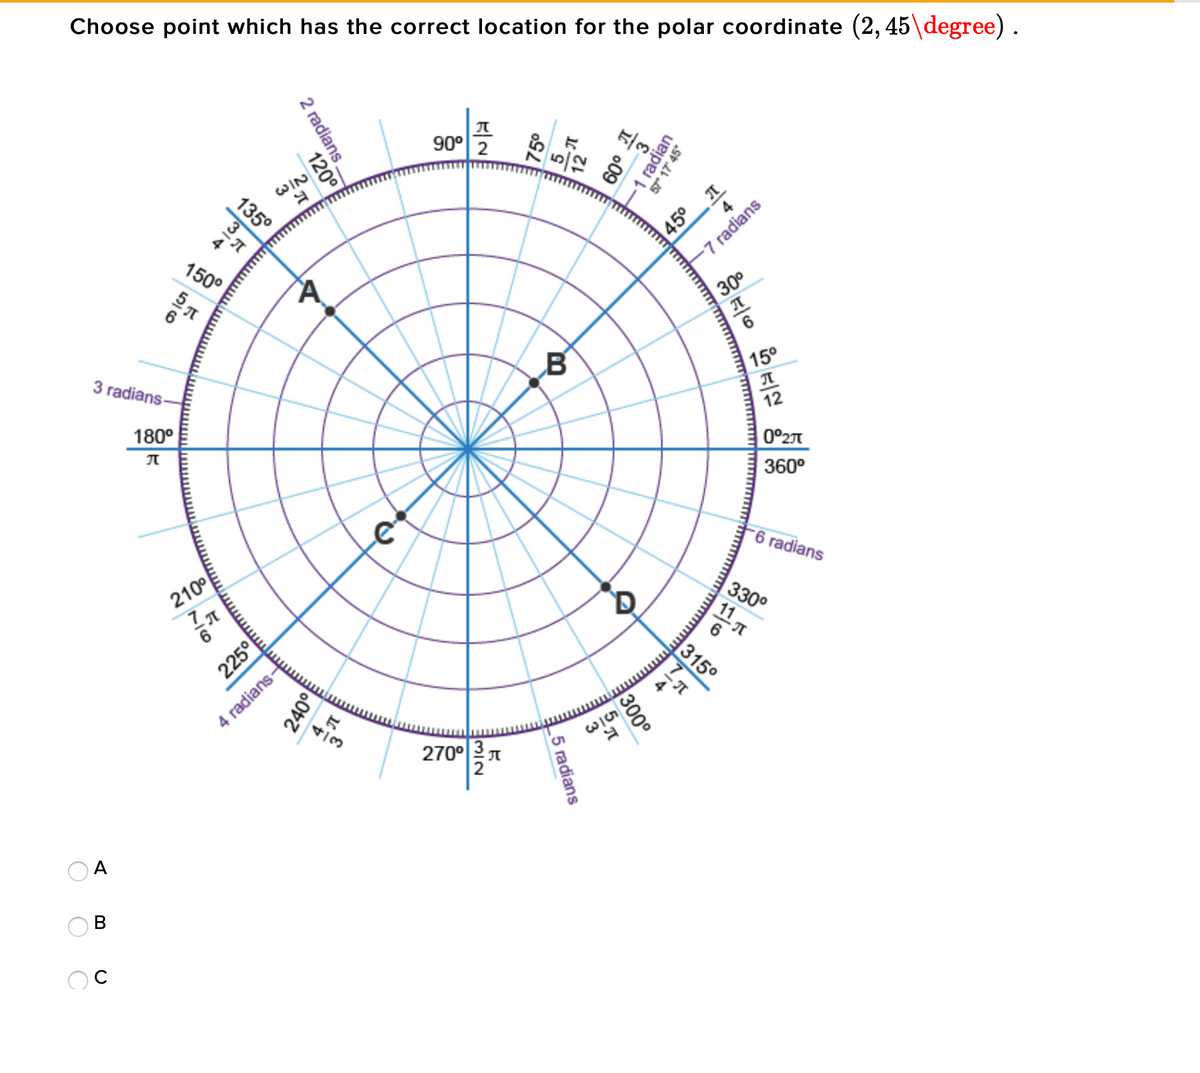 Choose point which has the correct location for the polar coordinate (2, 45\degree).
90° 2
WIN
45° T
-7 radians
150°
30°
3 radians-
B®
15°
180°
12
0°2
360°
-6 radians
210°
330°
315°
4 radians-
4/3
2700π
A
B
1 radian
57° 17 45
프
2 radians.
120°
135°
300°
5 radians
225°
240이
